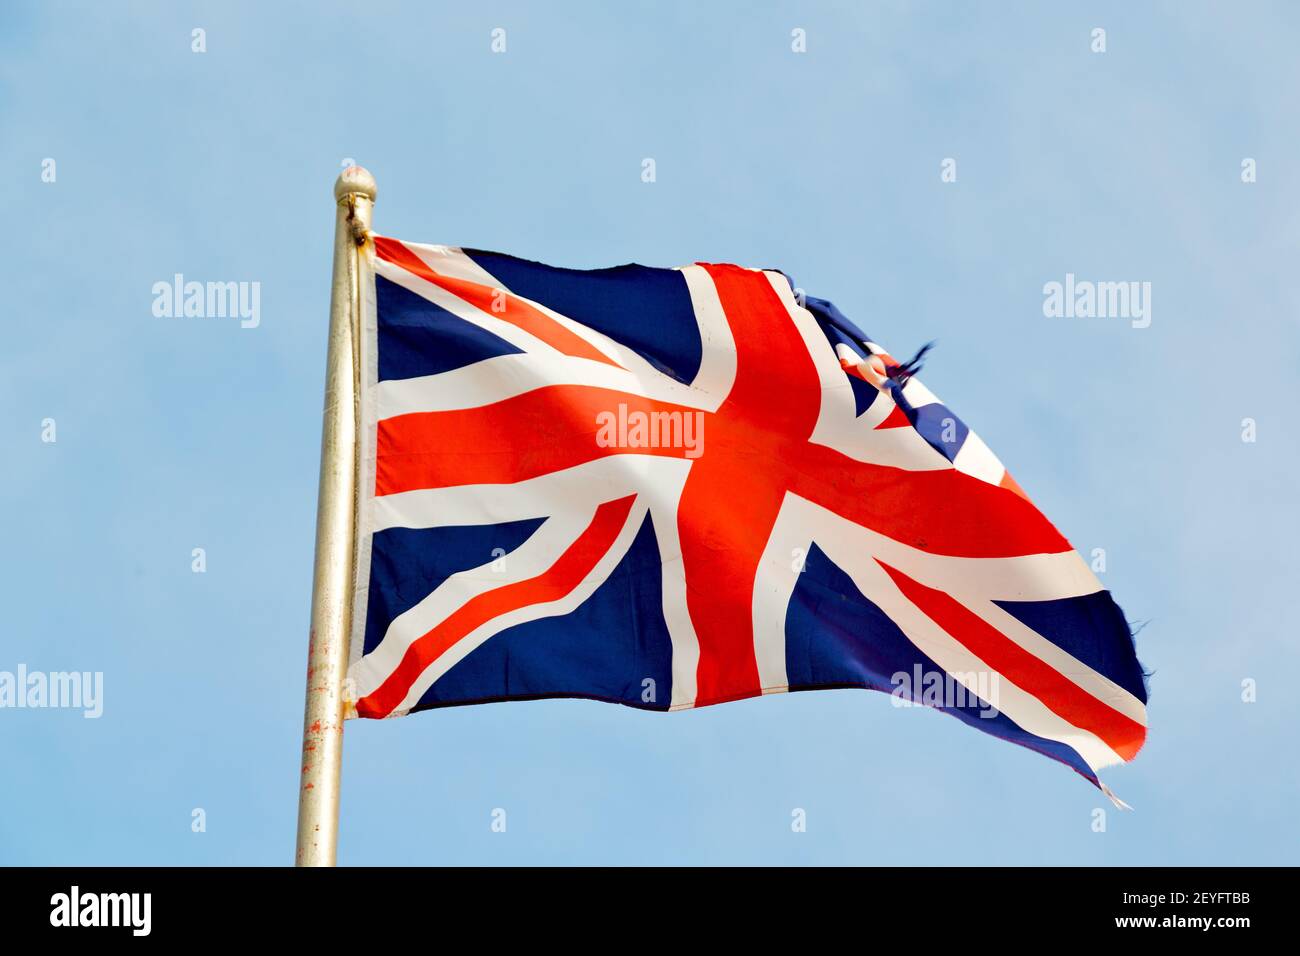 Waving flag in the blue sky Stock Photo